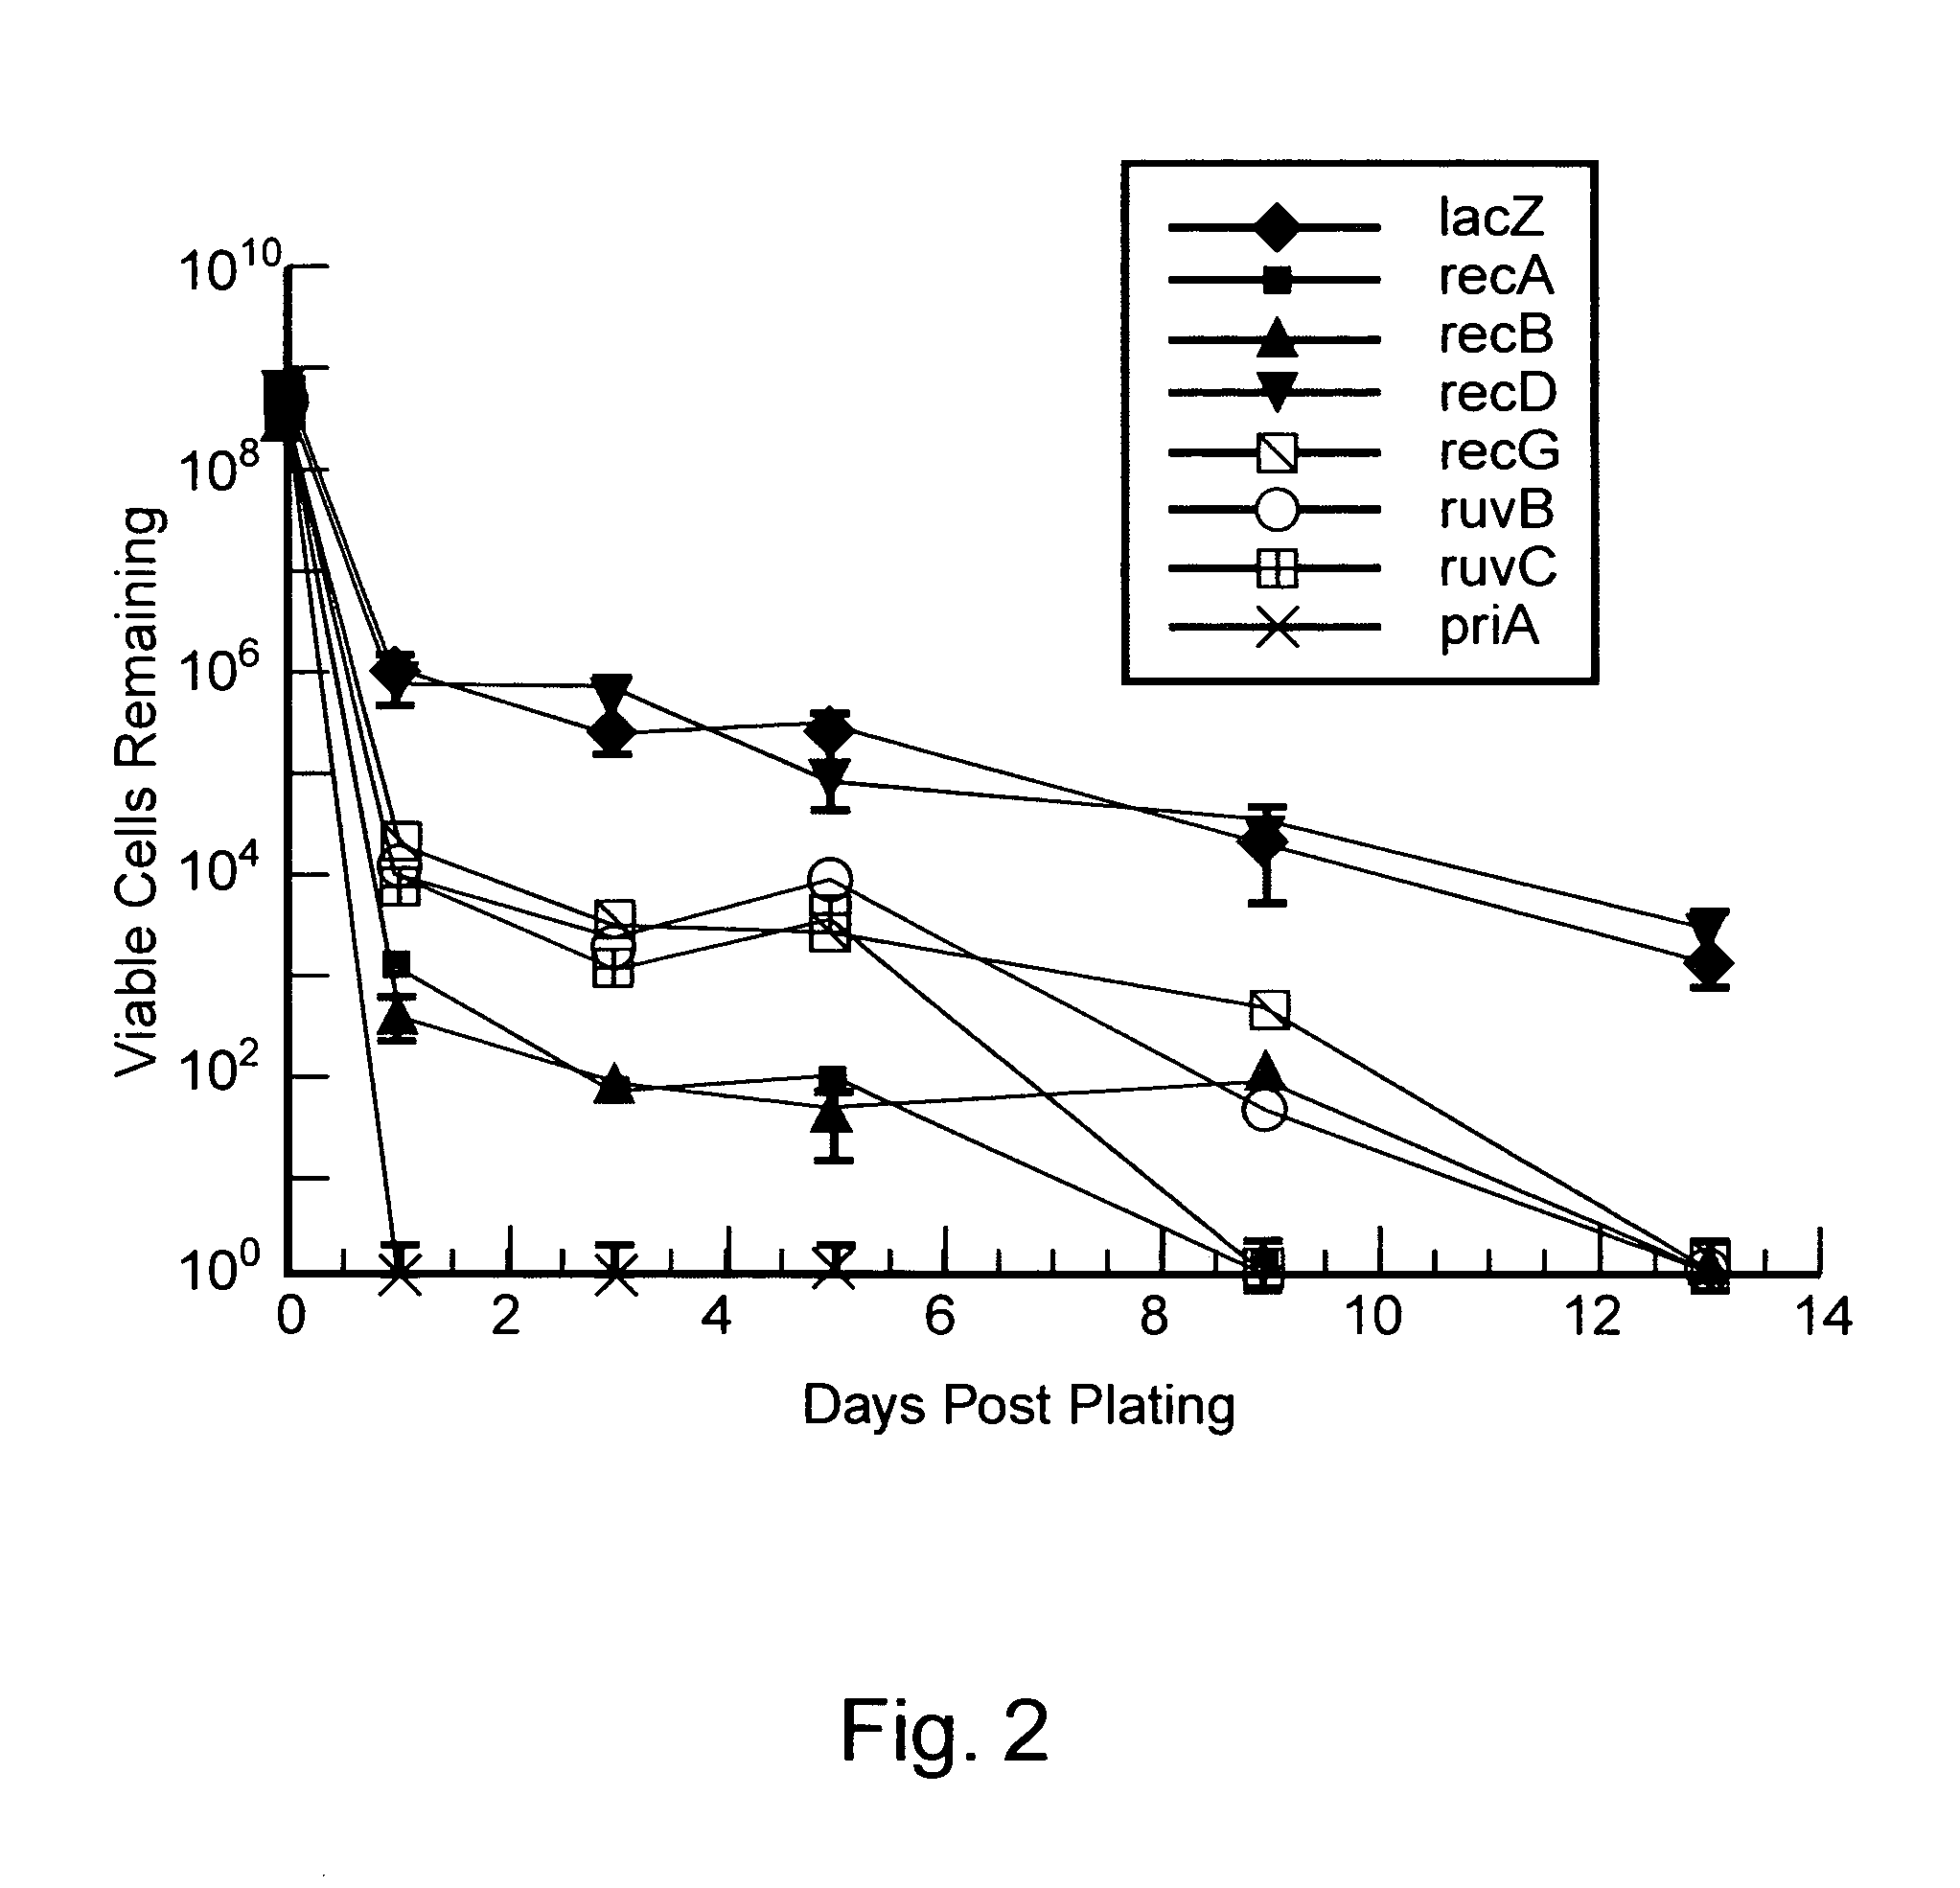 Business methods for commercializing antimicrobial and cytotoxic compounds